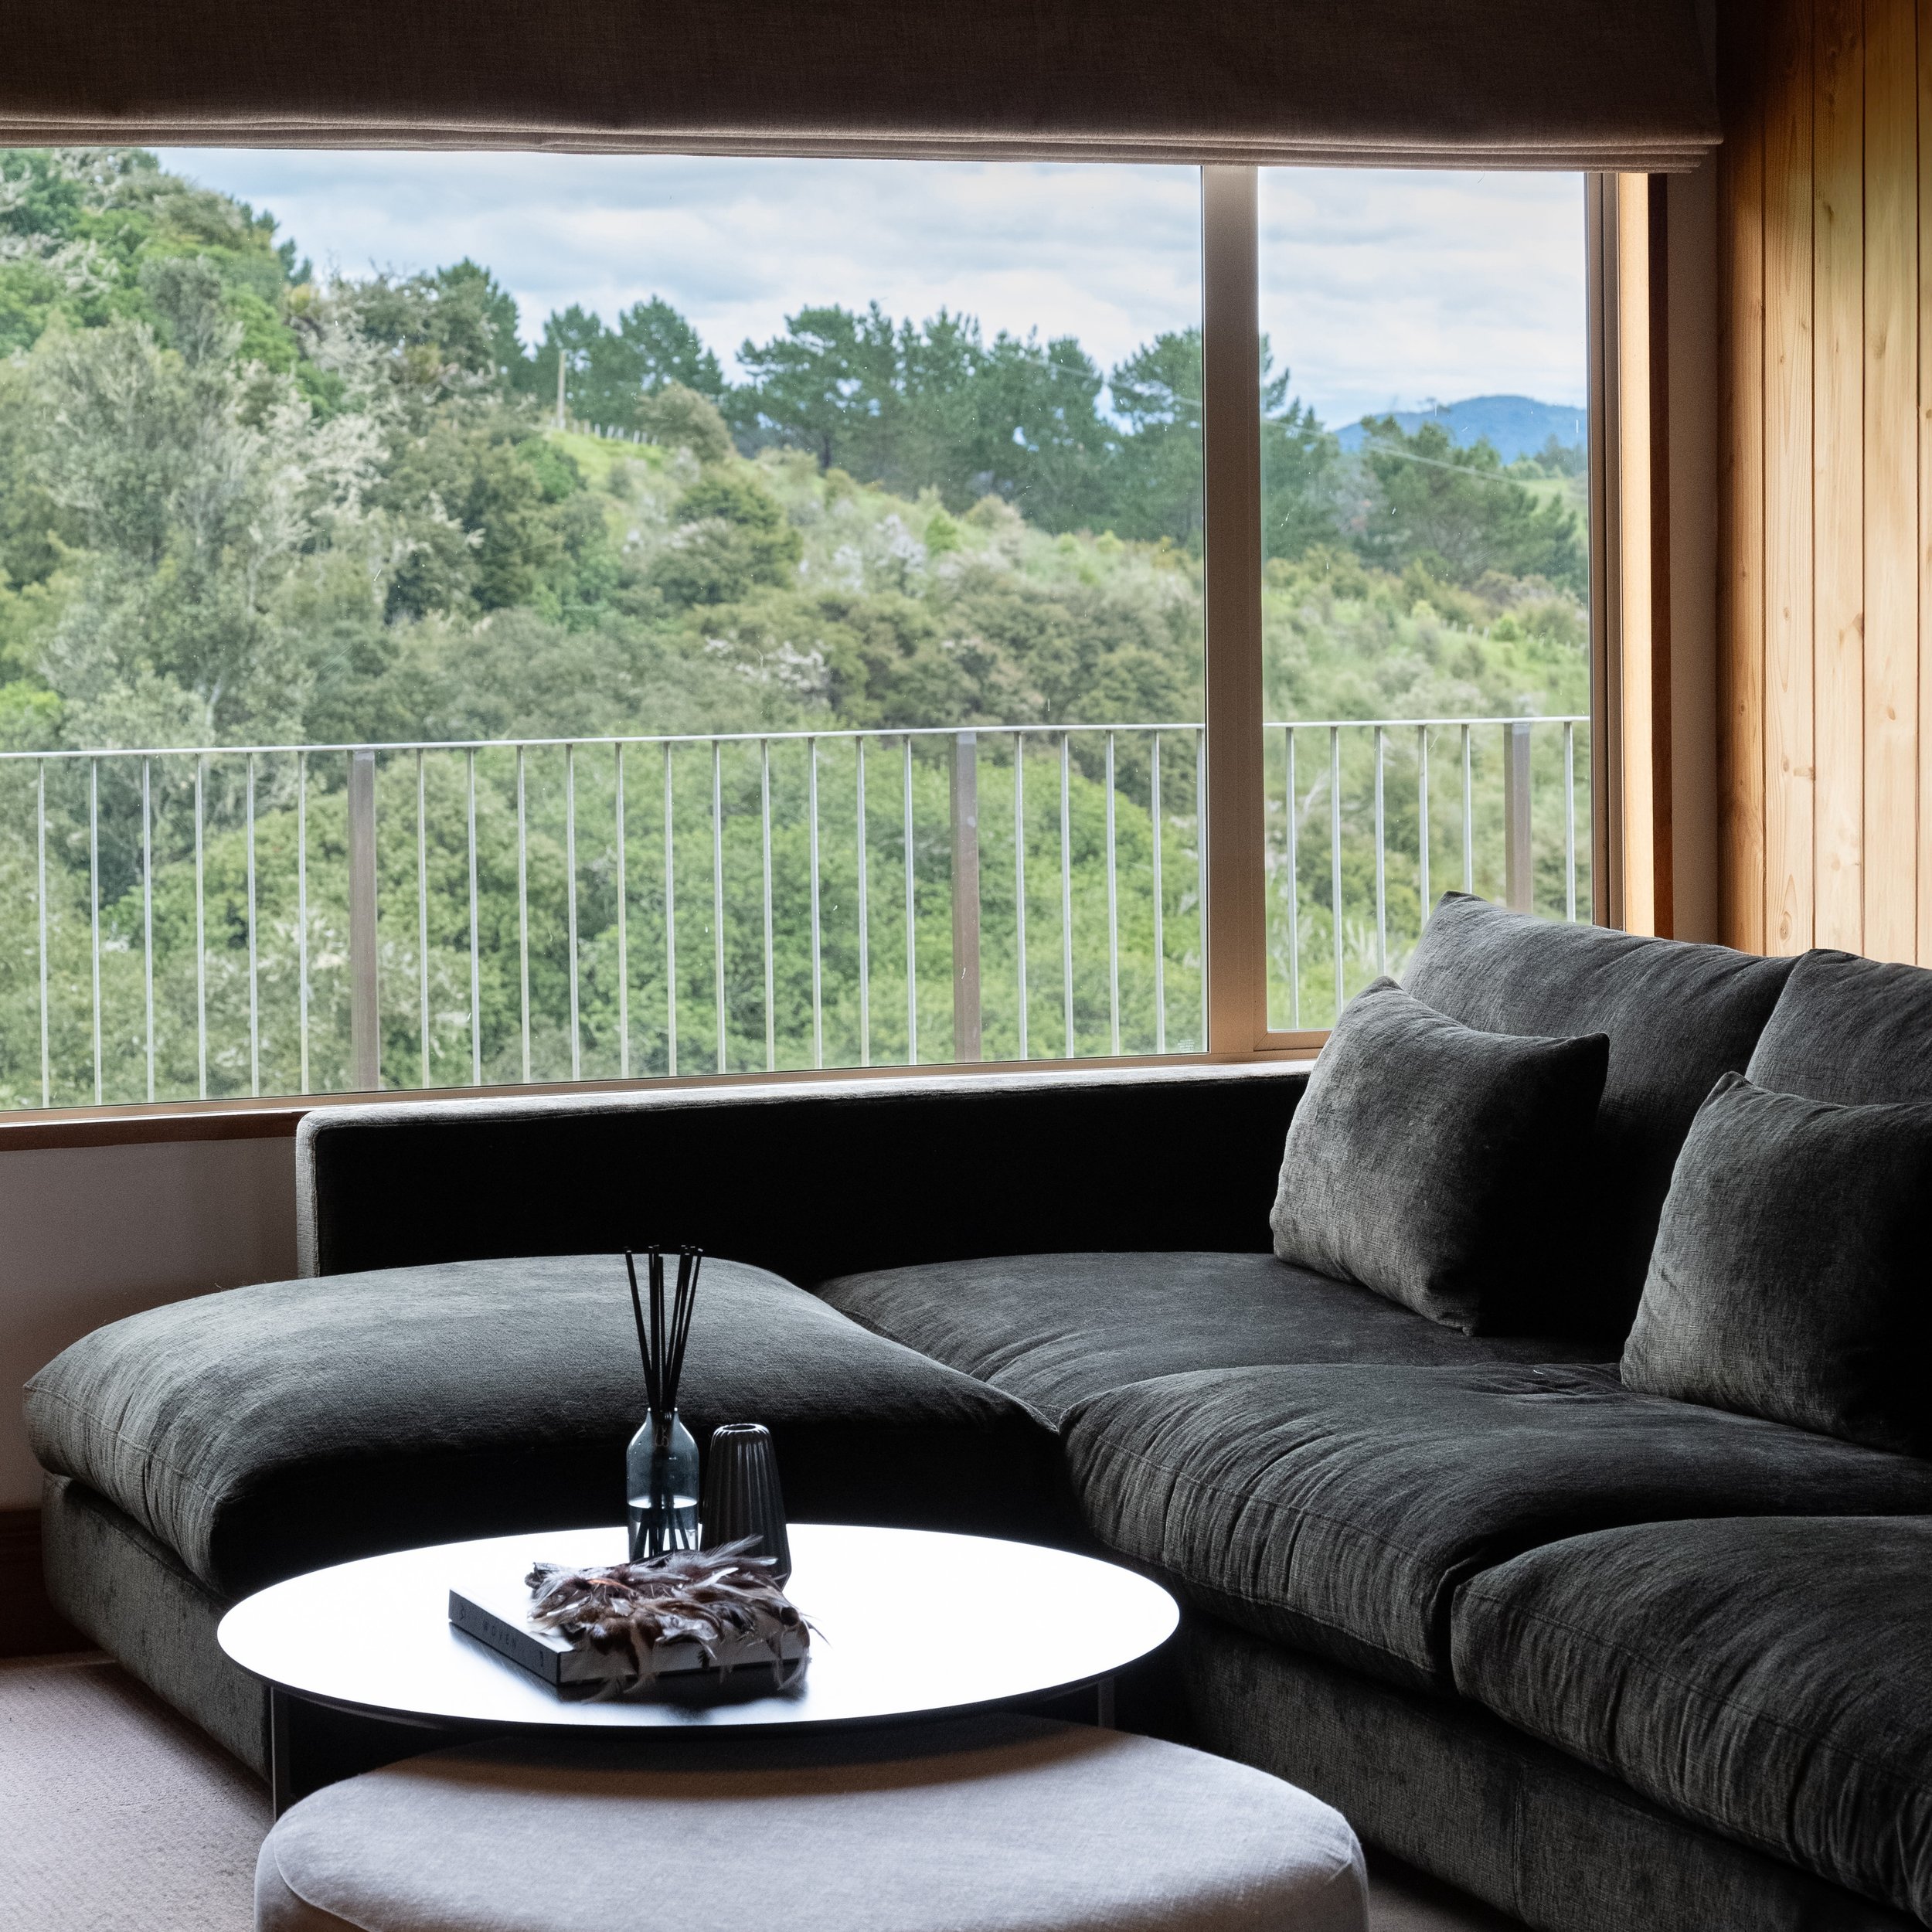 Just beyond the forest green velvet is a view that dreams are made of. A visual link of drawing the outside in by using the most luxurious viscose velvet by @mokumstudio. Selected for this amazing sofa hand-made to perfection in New Zealand. 

Lookin